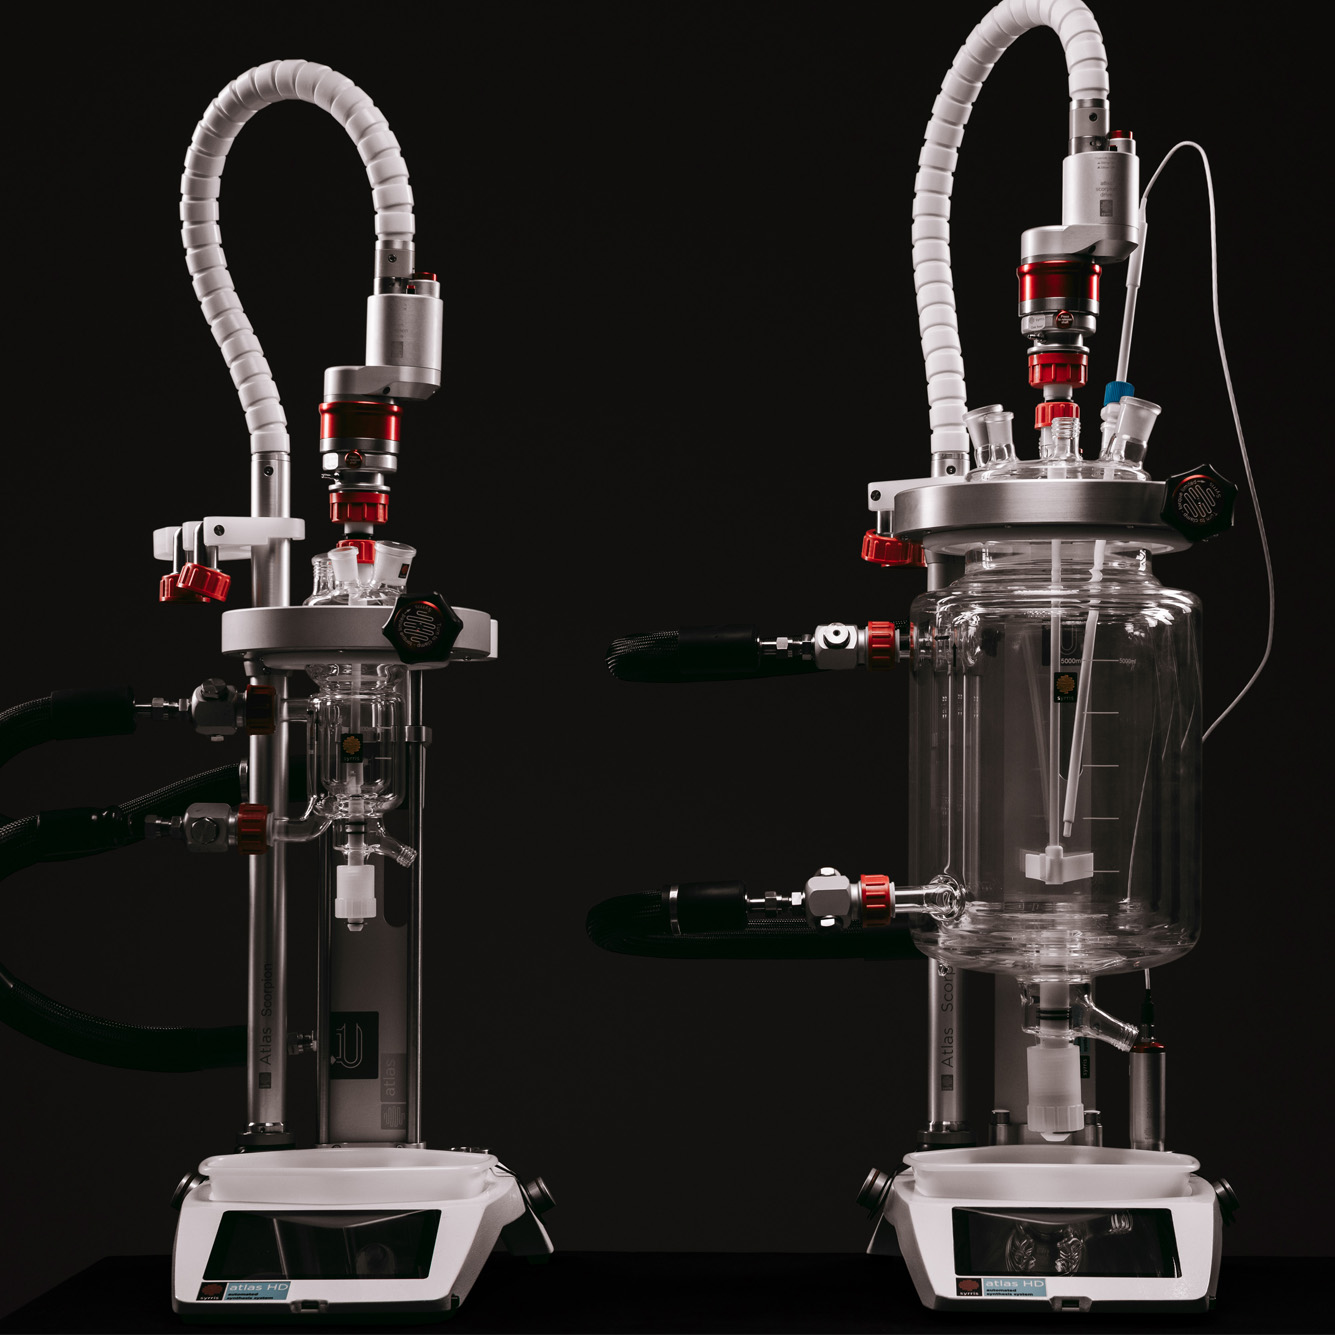 Syrris Atlas HD automated jacketed reactor systems